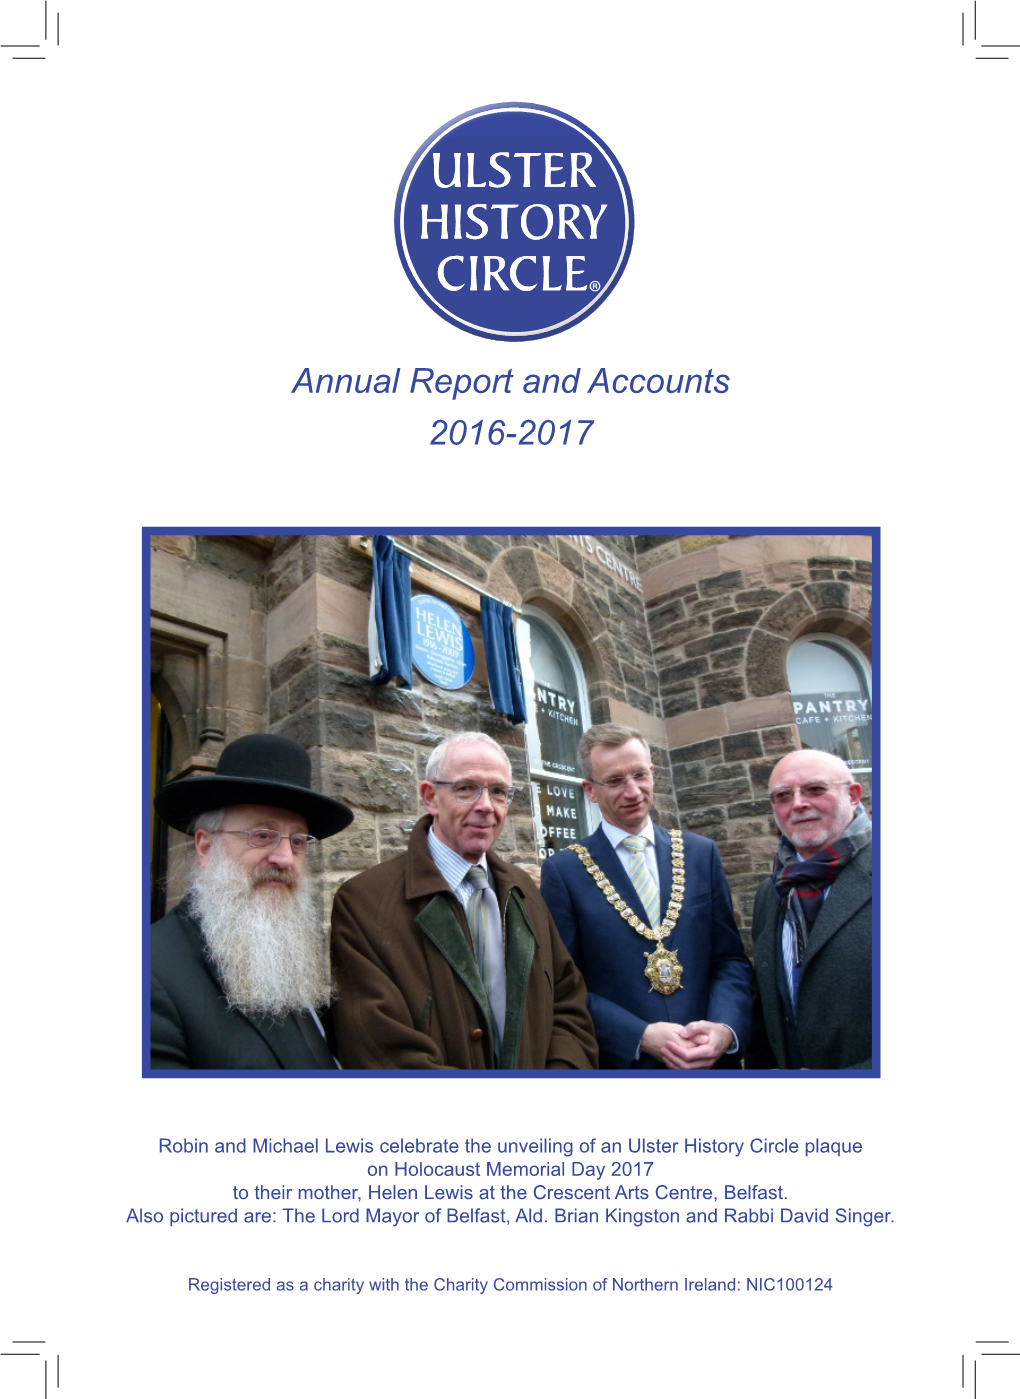 Annual Report and Accounts 2016-2017